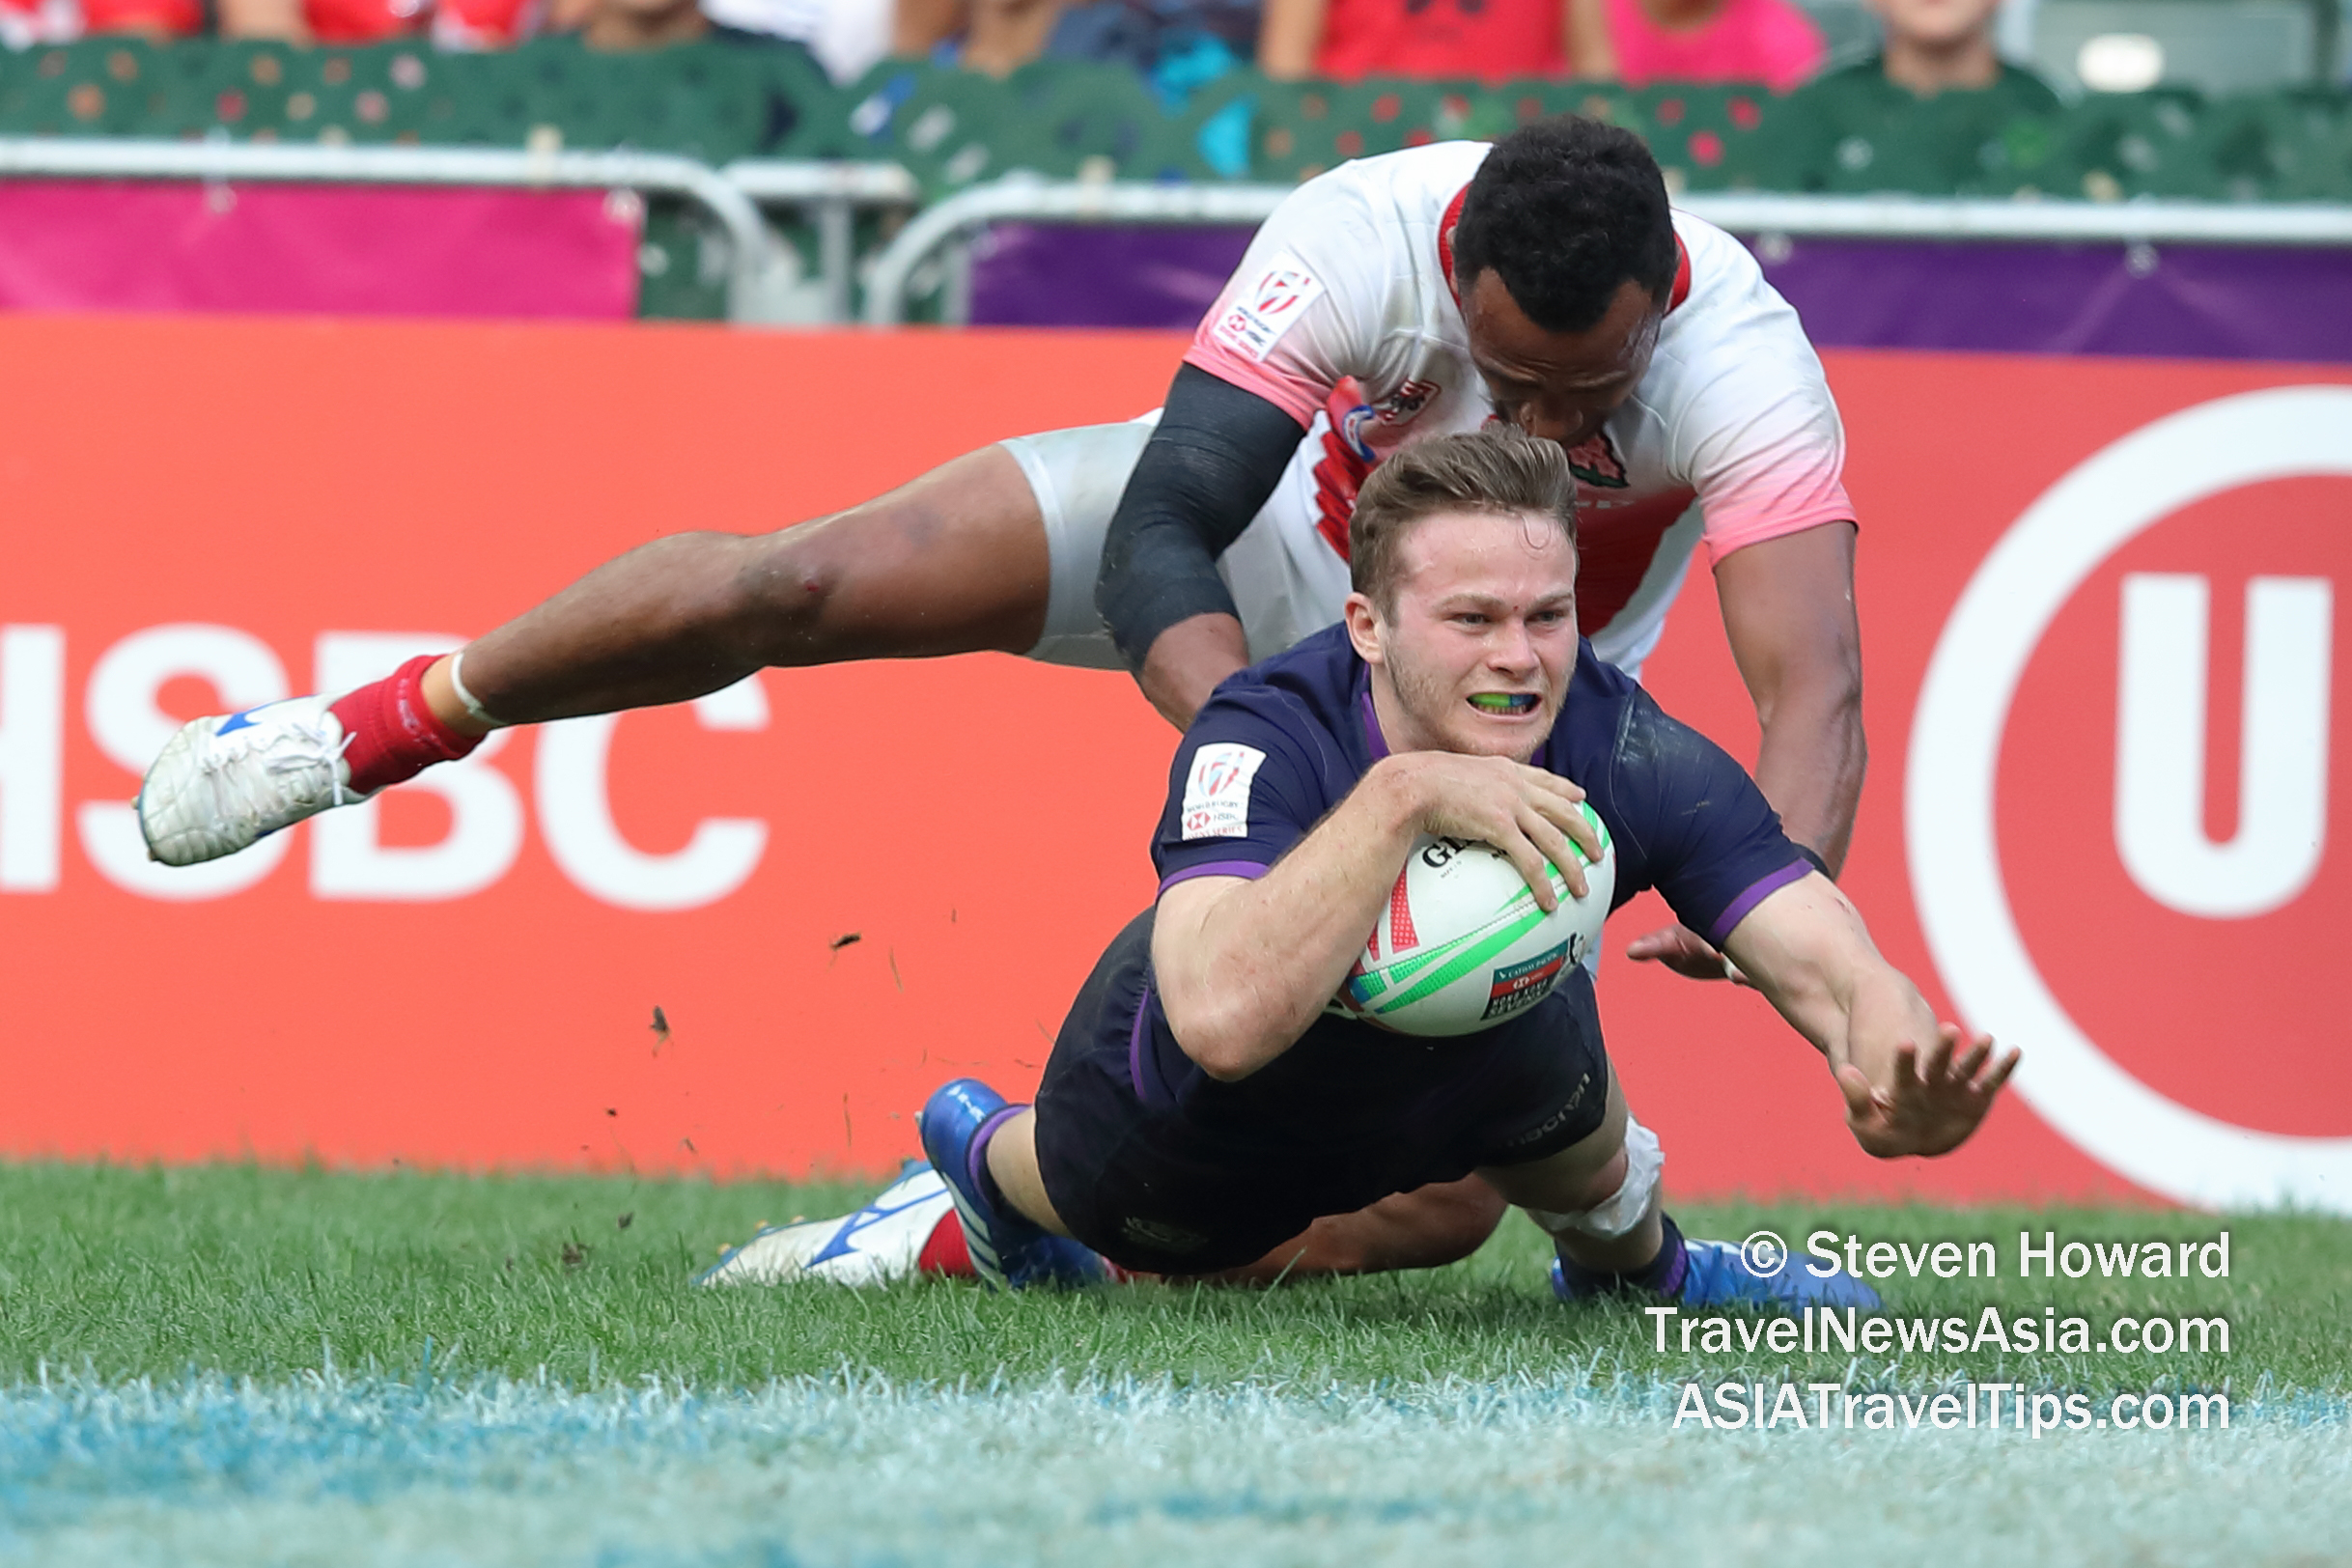 Scotland scoring a try against Japan at the Cathay Pacific / HSBC World Rugby Hong Kong Sevens 2019. Picture by Steven Howard of TravelNewsAsia.com Click to enlarge.